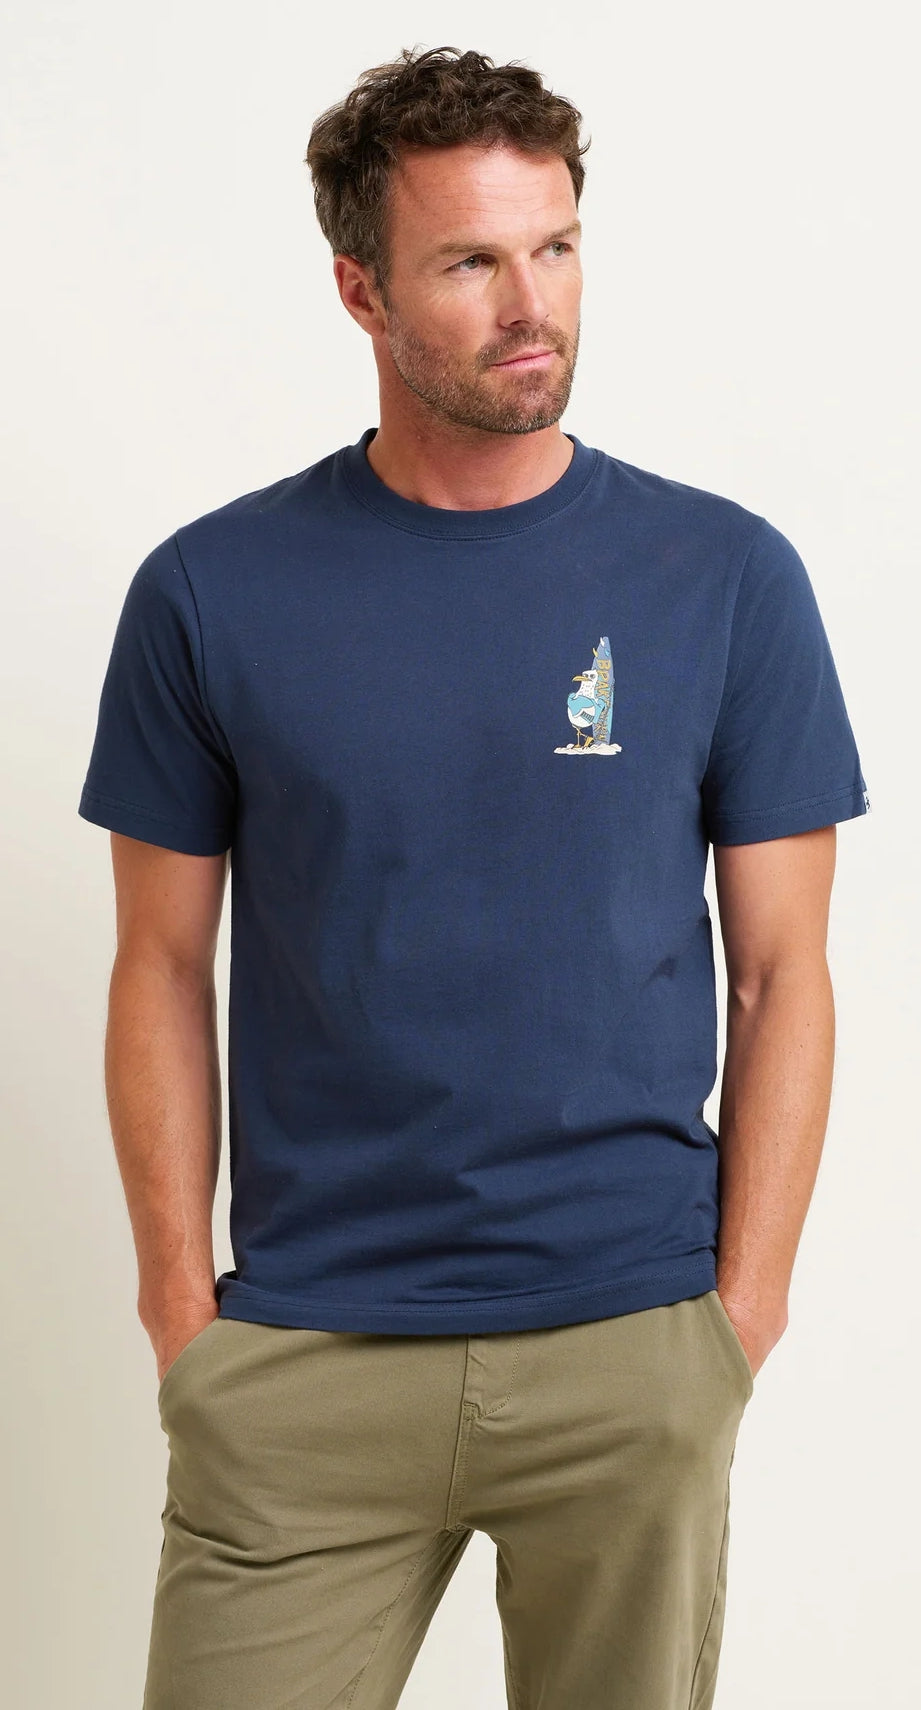 Front view of a men's navy Brakeburn Seagull print t-shirt.